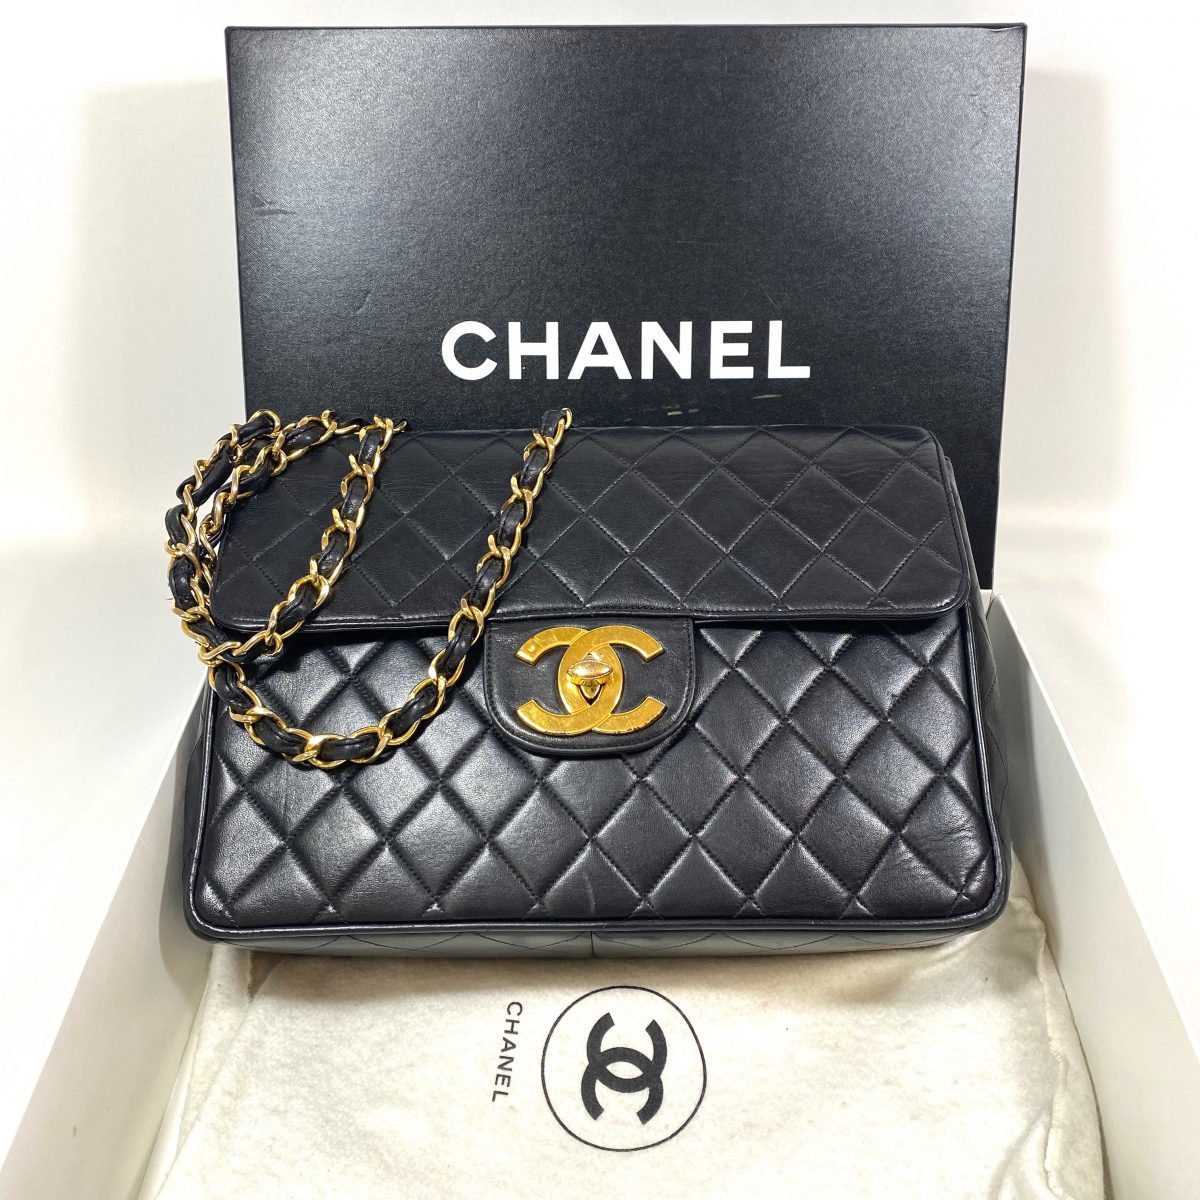 Chanel vintage bags